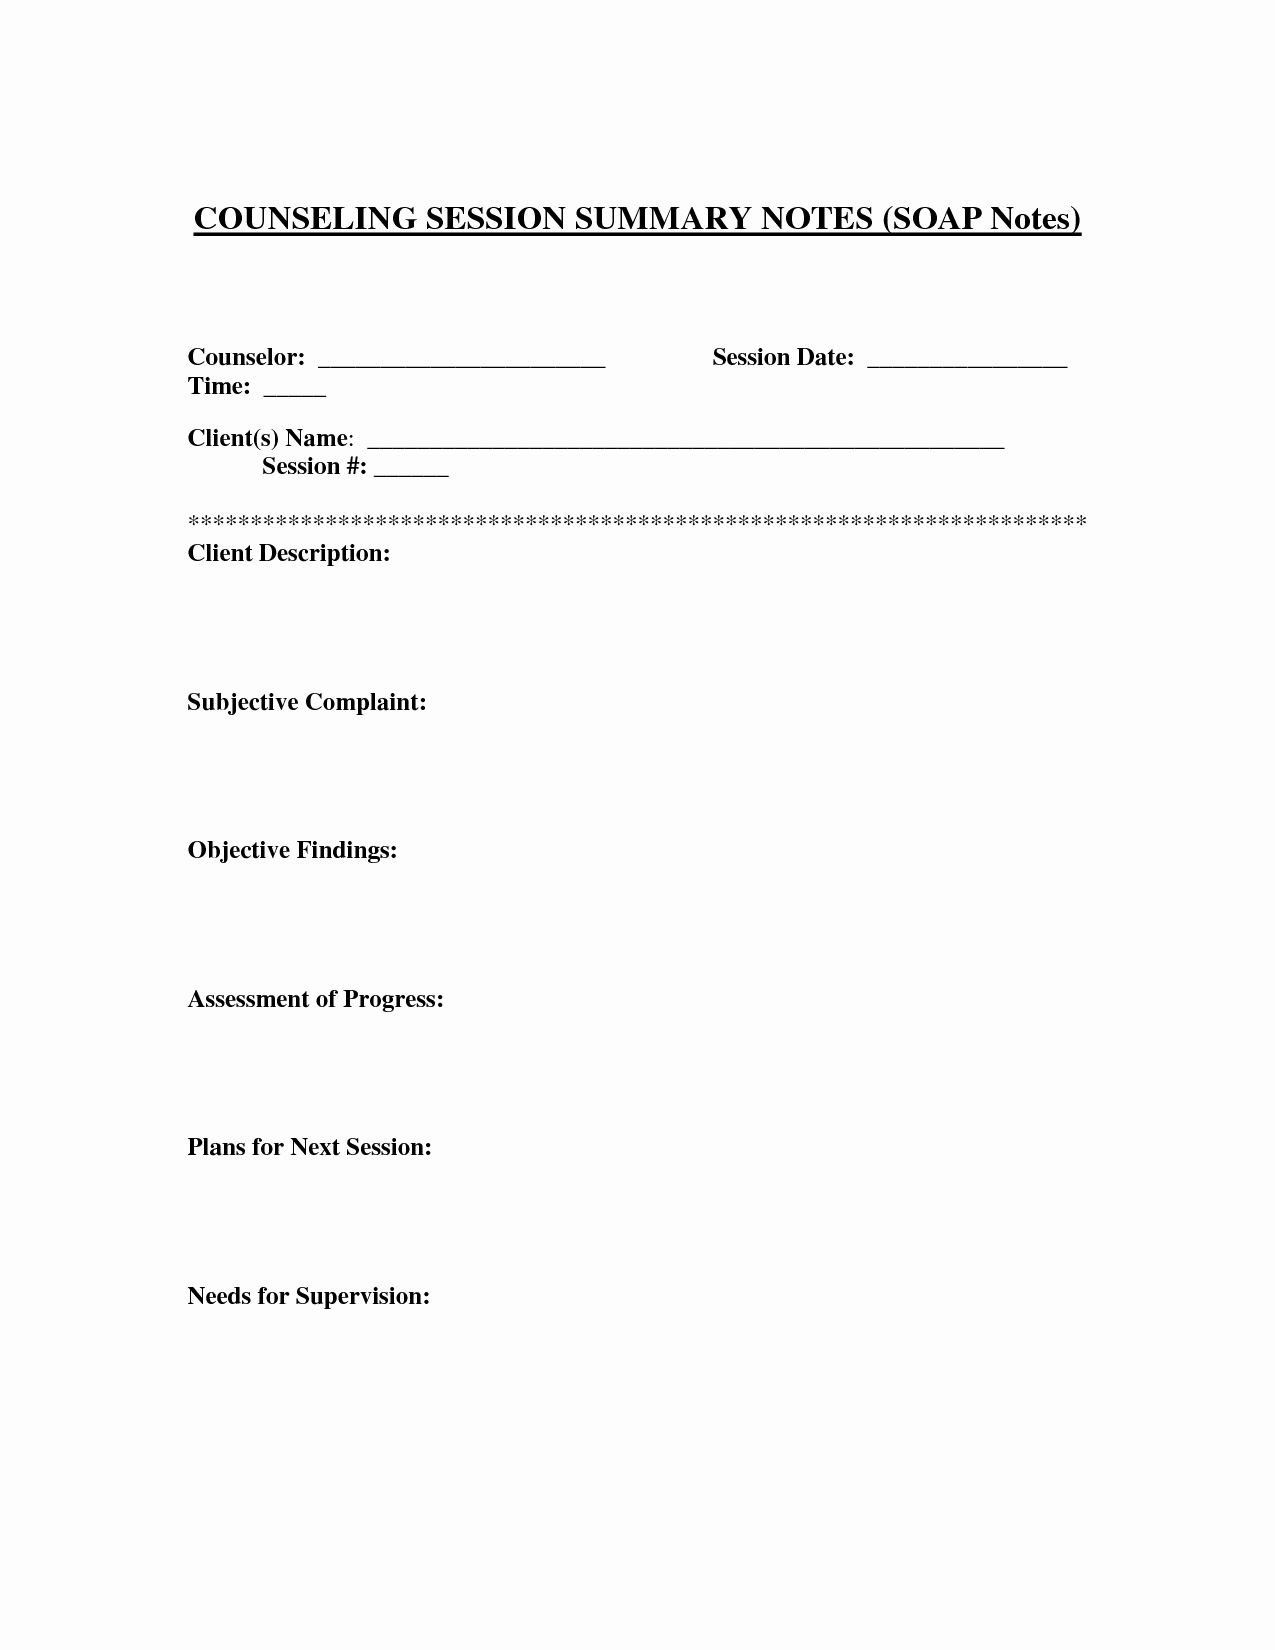 Counseling Treatment Plan Template Pdf Best Of soap Notes Template for Counseling Google Search